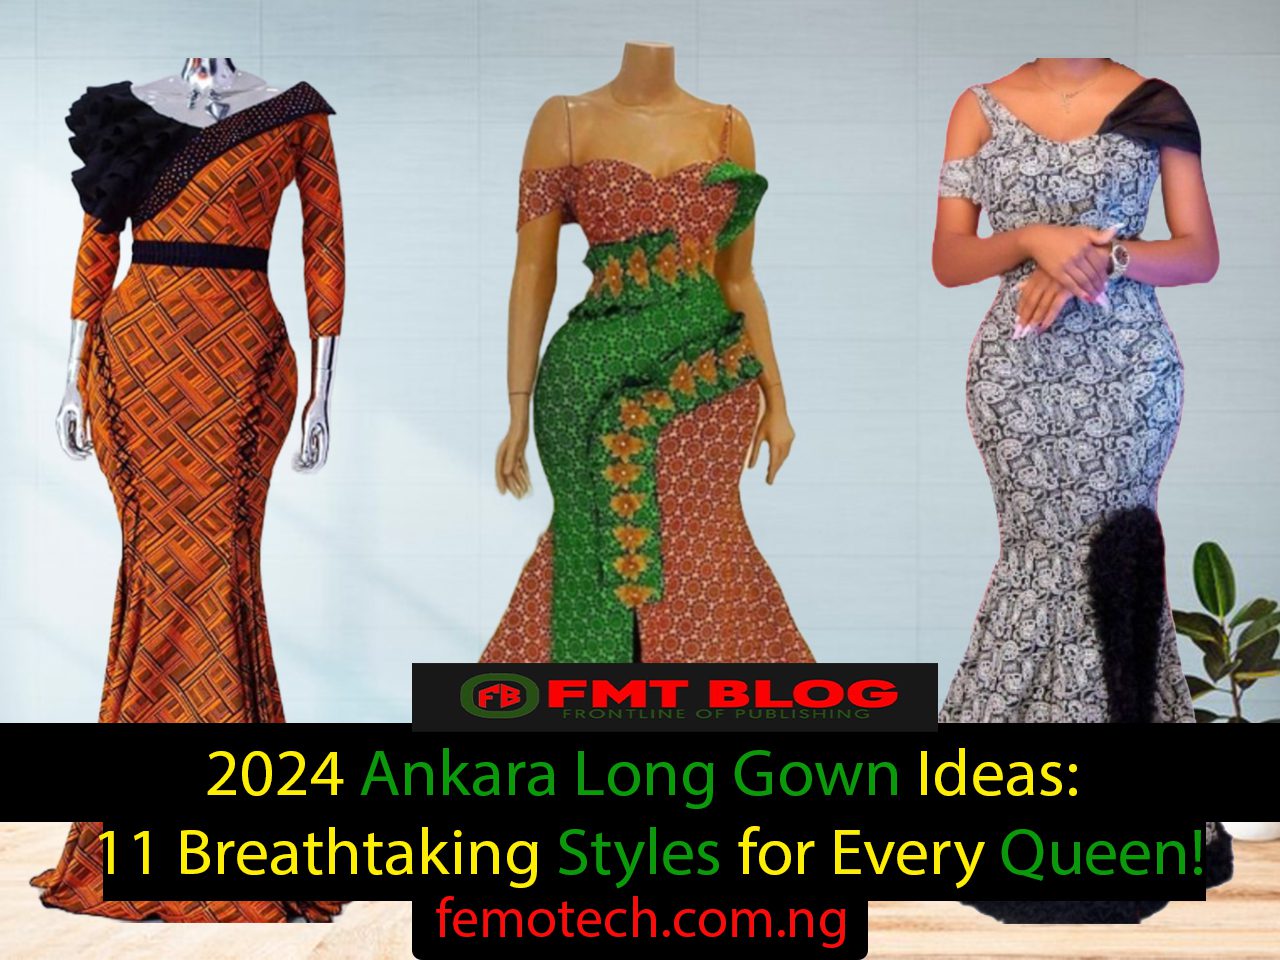 2024 Ankara Long Gown Ideas: 11 Breathtaking Styles for Every Queen!